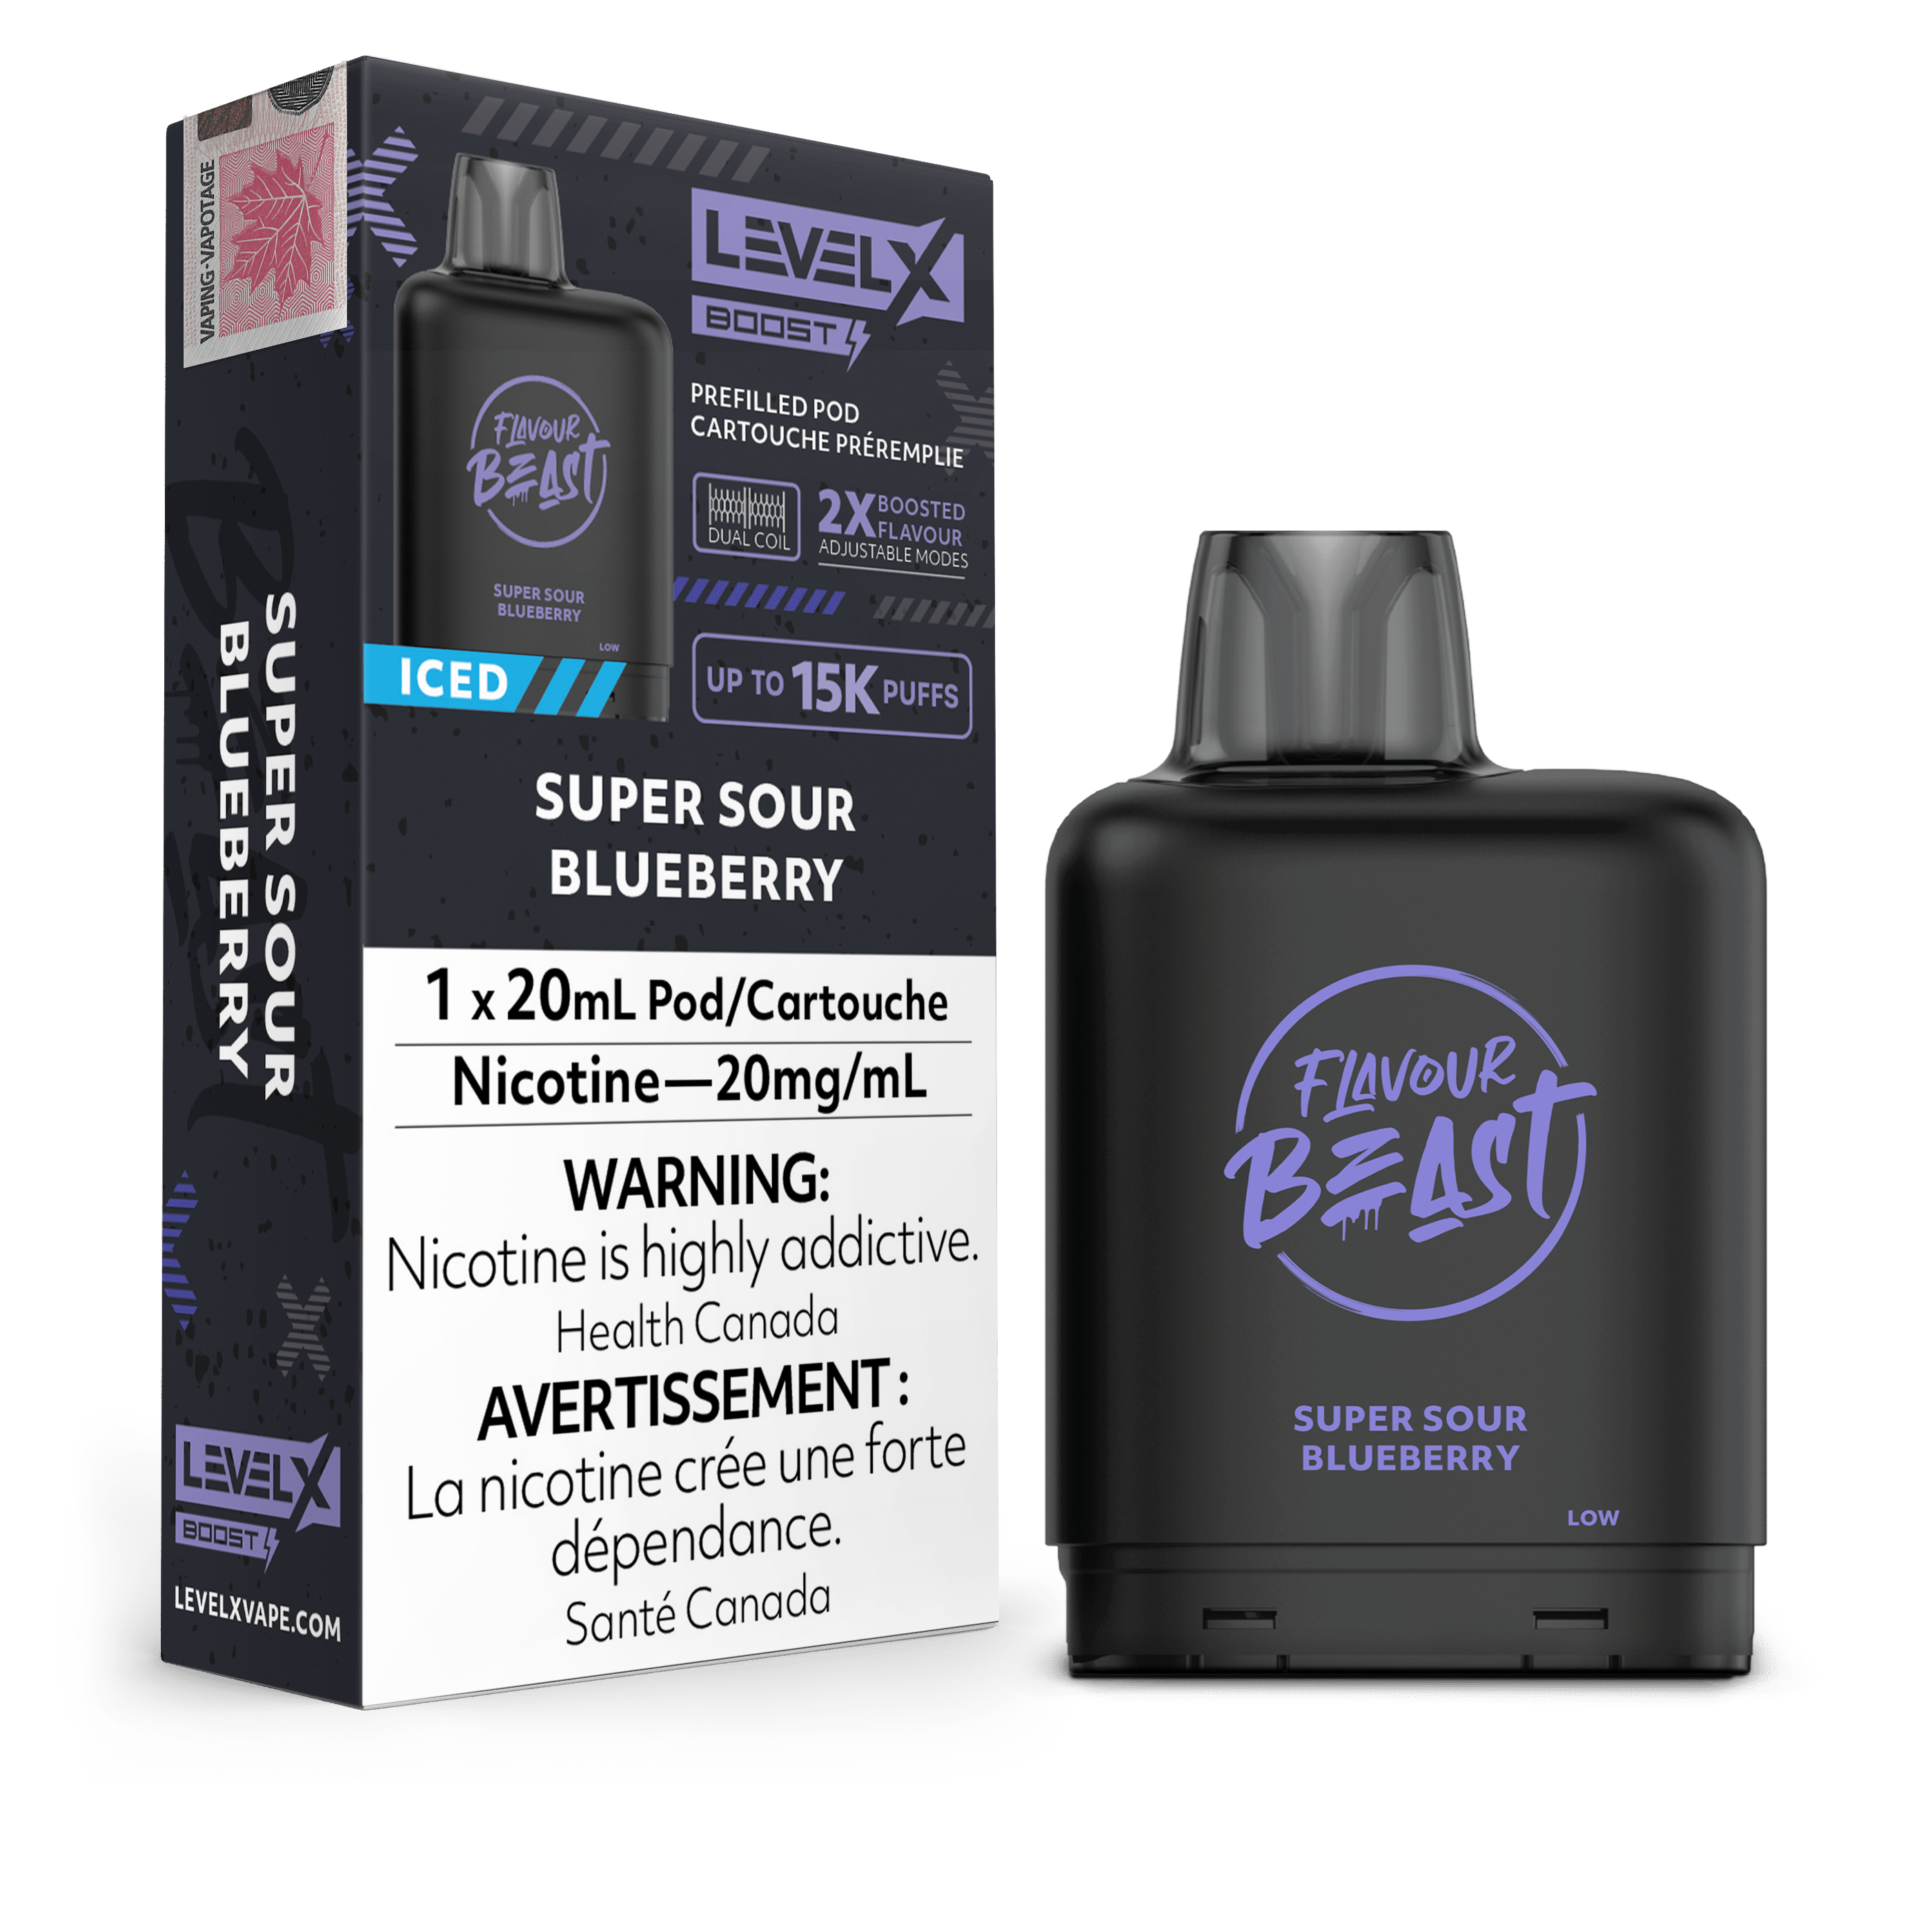 Level X Flavour Beast Boost Pod - Super Sour Blueberry Iced available on Canada online vape shop